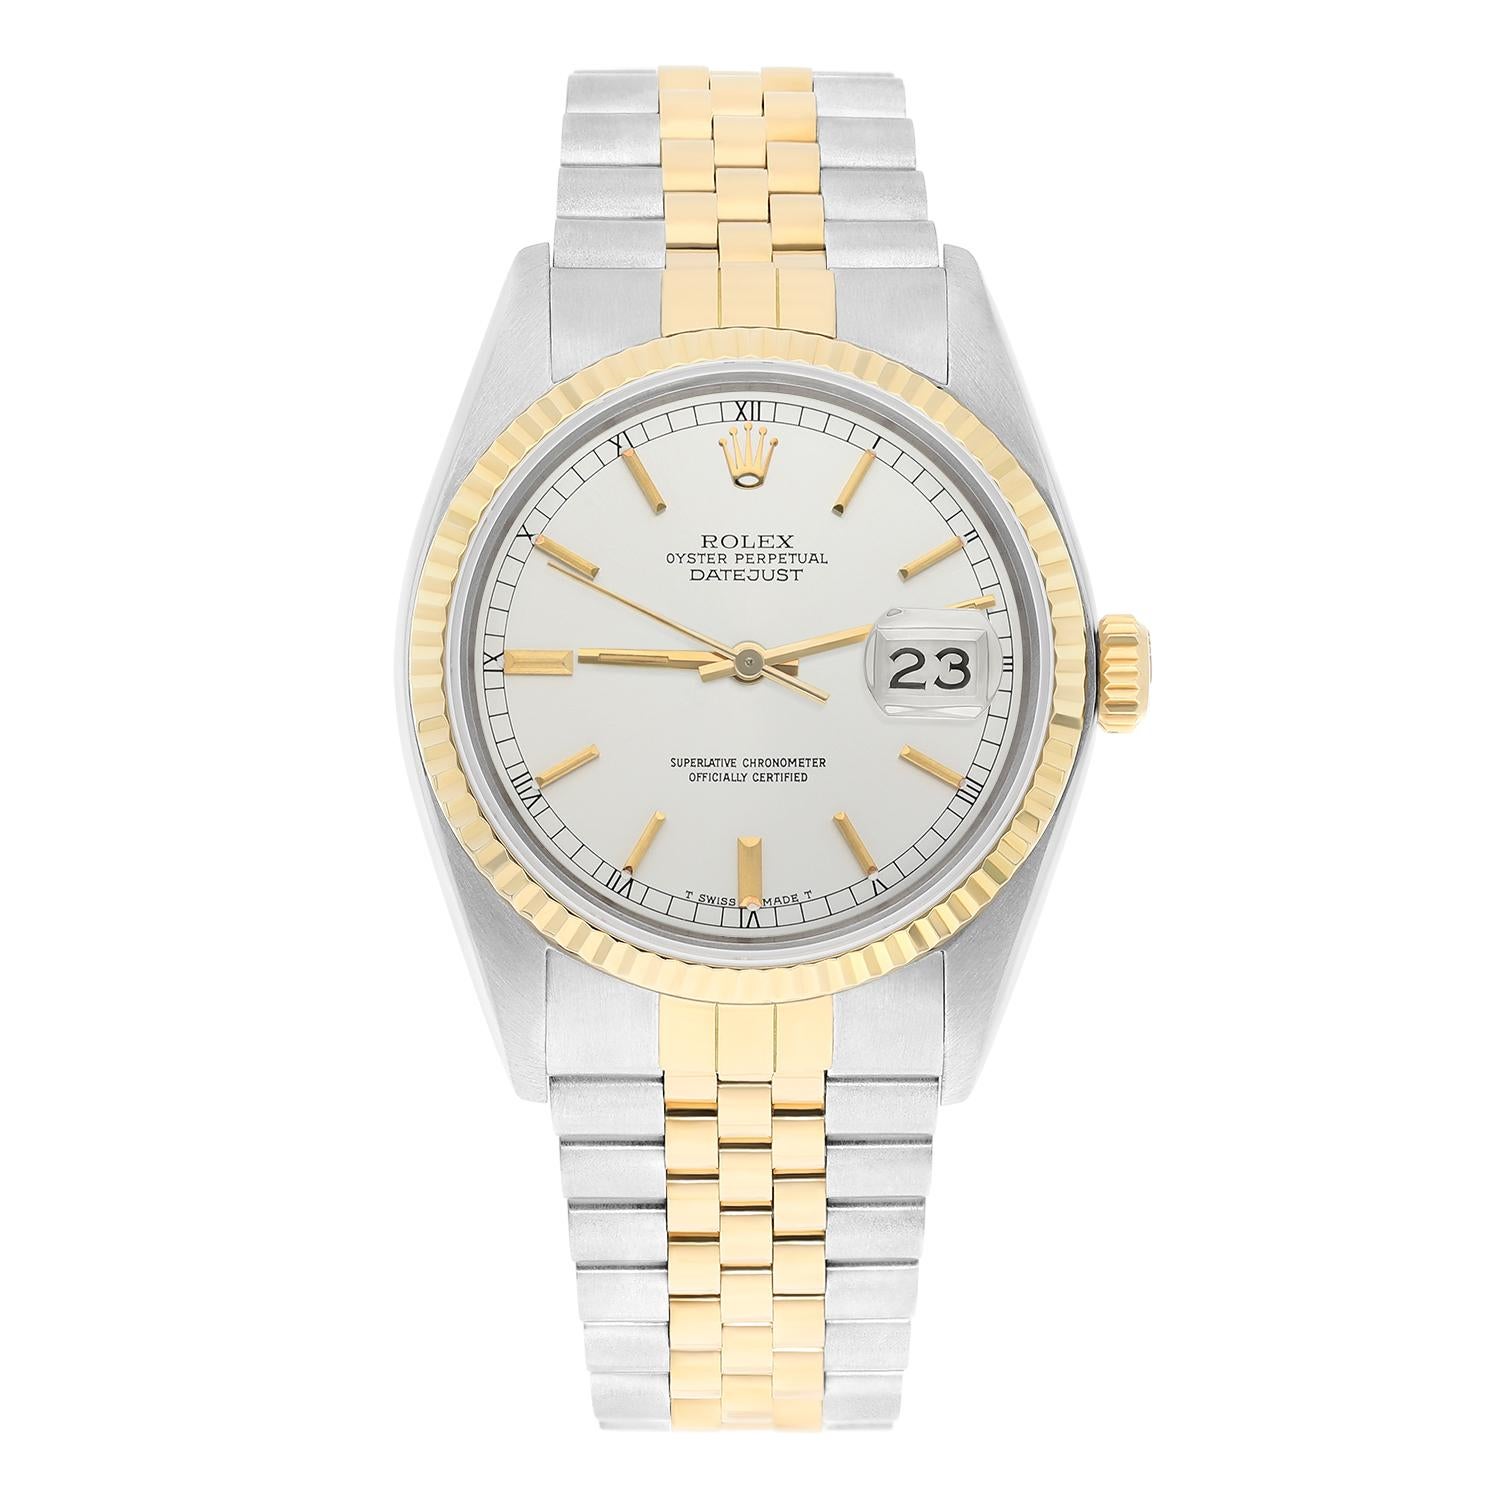 This watch has been professionally polished, serviced and is in excellent overall condition. There are absolutely no visible scratches or blemishes. Model features quick-set movement. Authenticity guaranteed! The sale comes with a Rolex box, and our